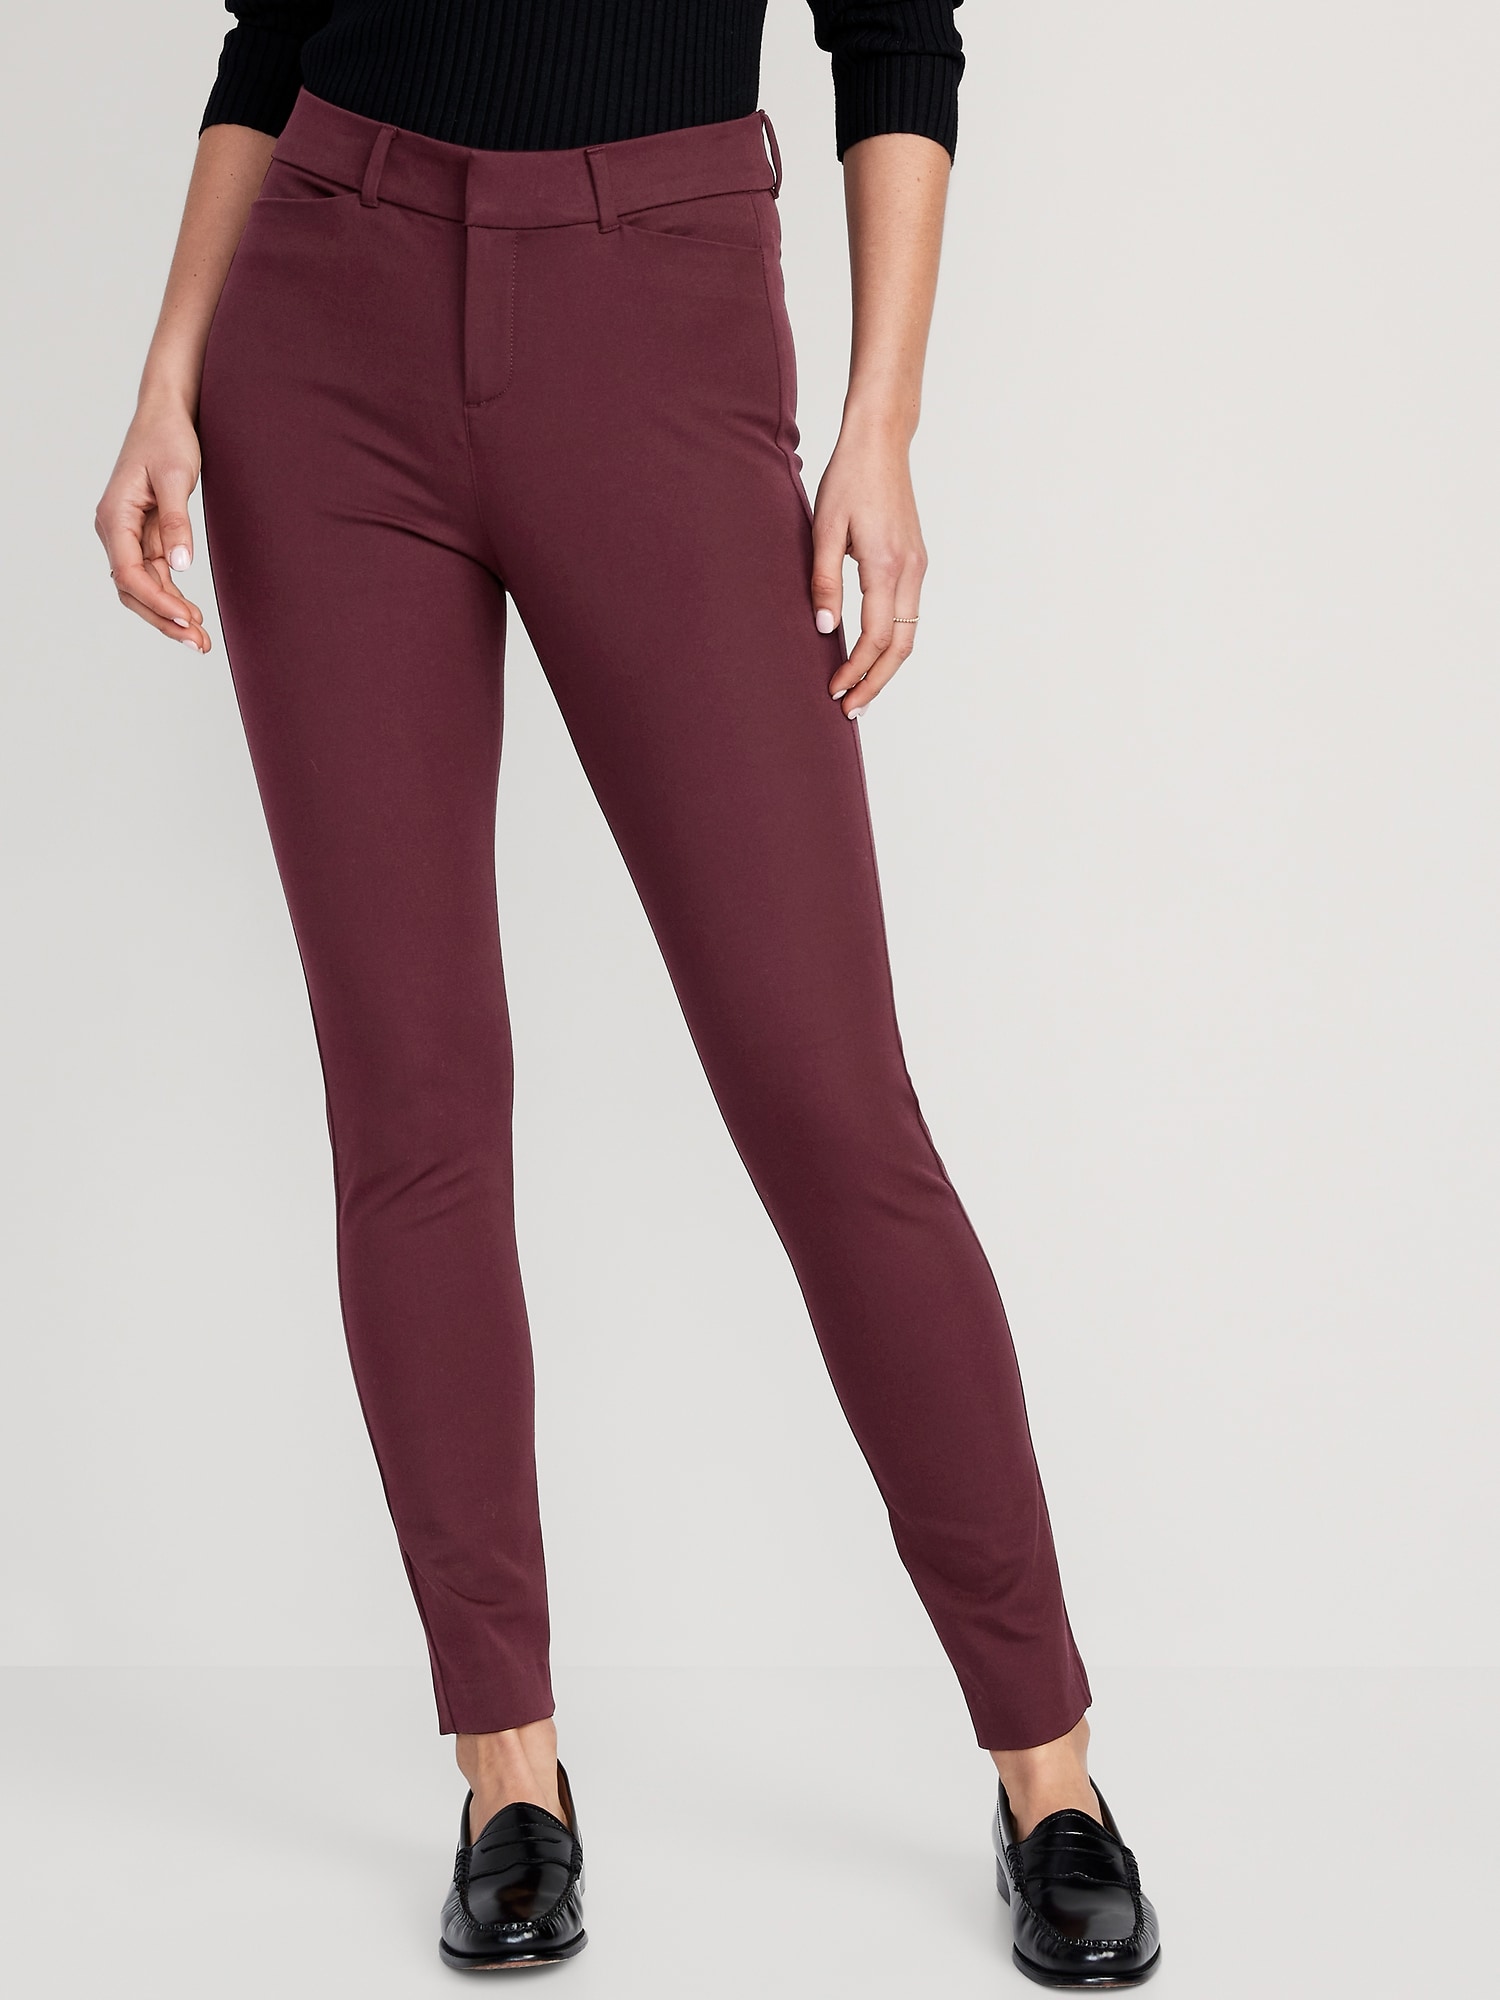 Can you wear maroon pants to the workplace? - Quora